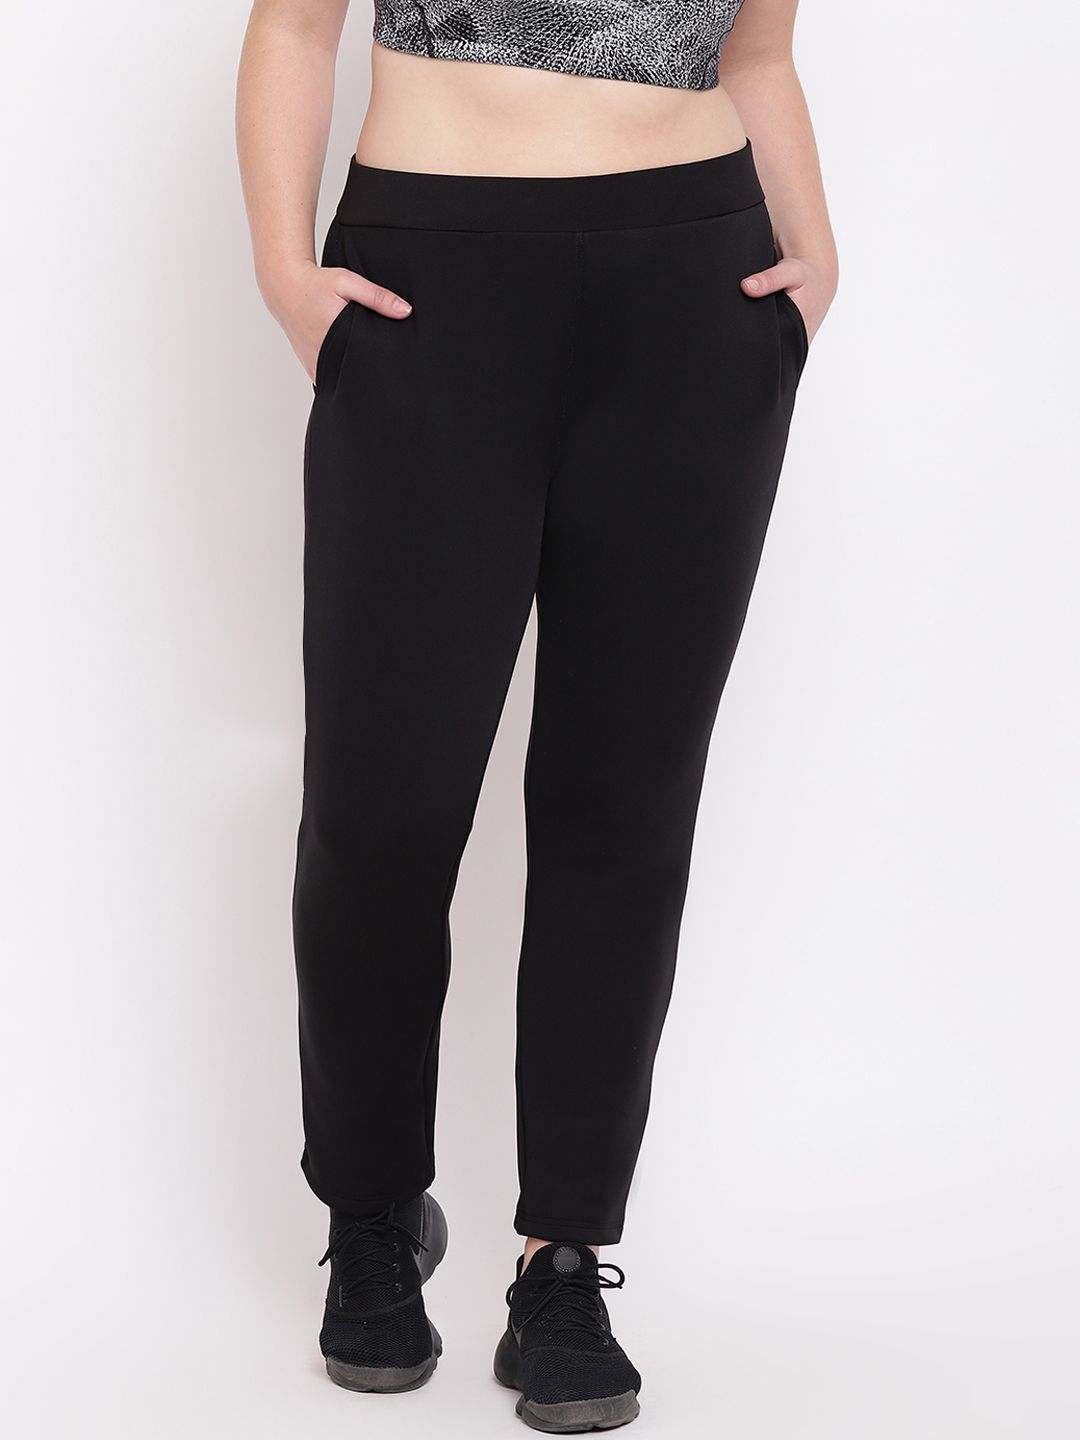 The Pink Moon Plus Size Women Black solid Tights Price in India